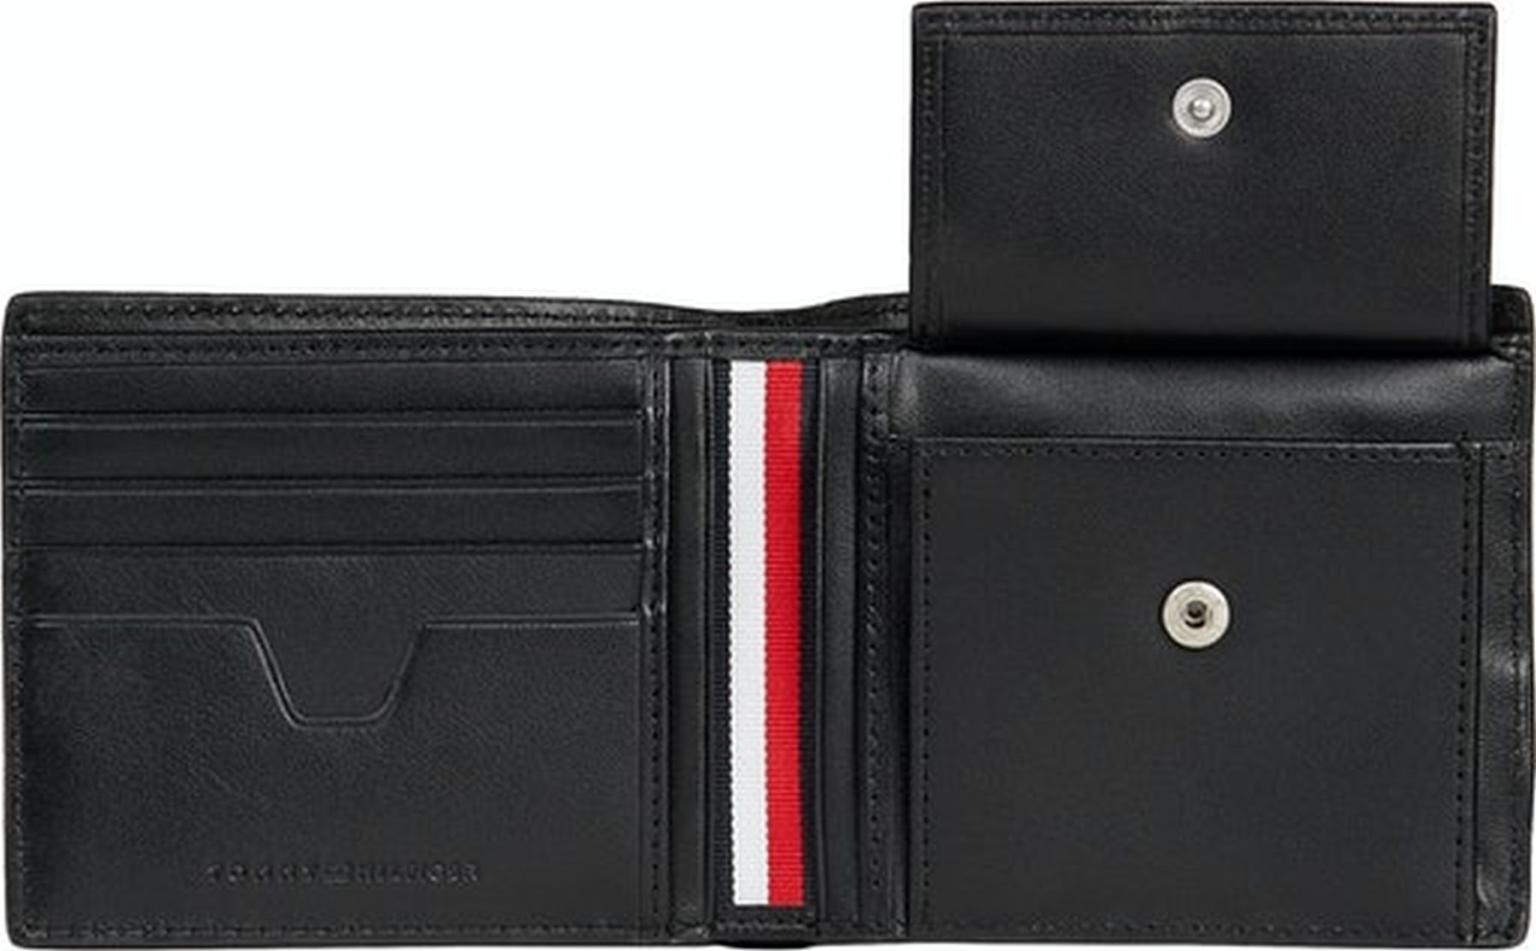 Coin RFID Hilfiger Bifold Branding Extra Herrenbörse CC and Tommy Central